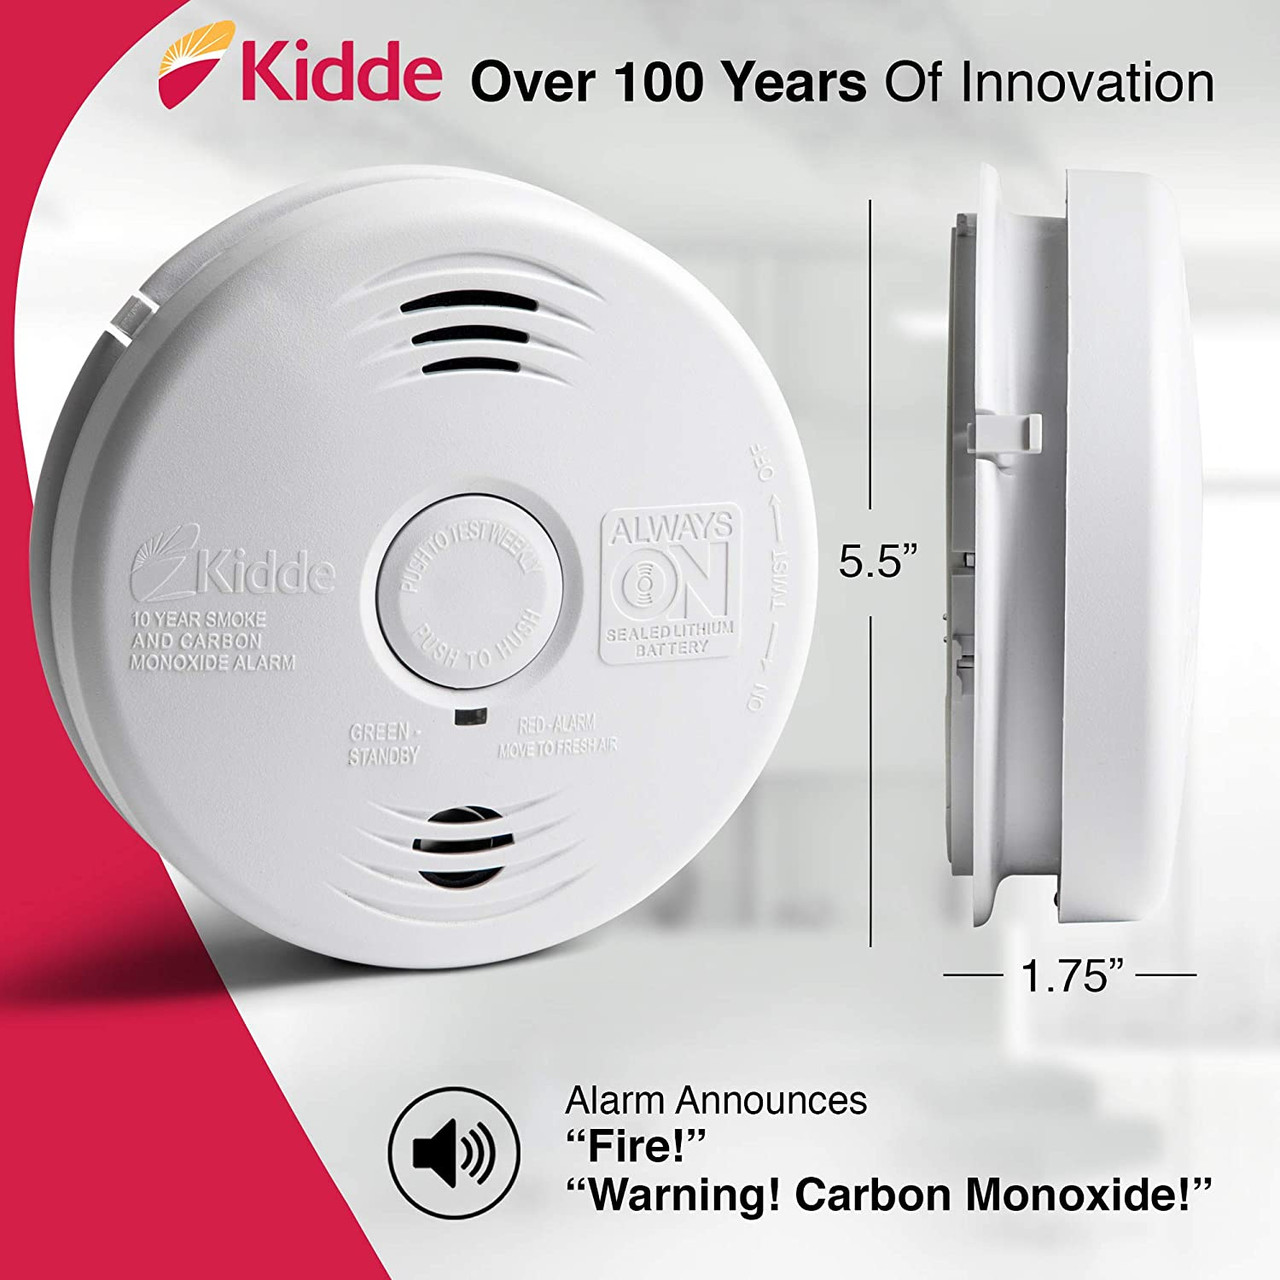 Kidde Smoke and Carbon Monoxide Alarm Review: All-In-One Unit